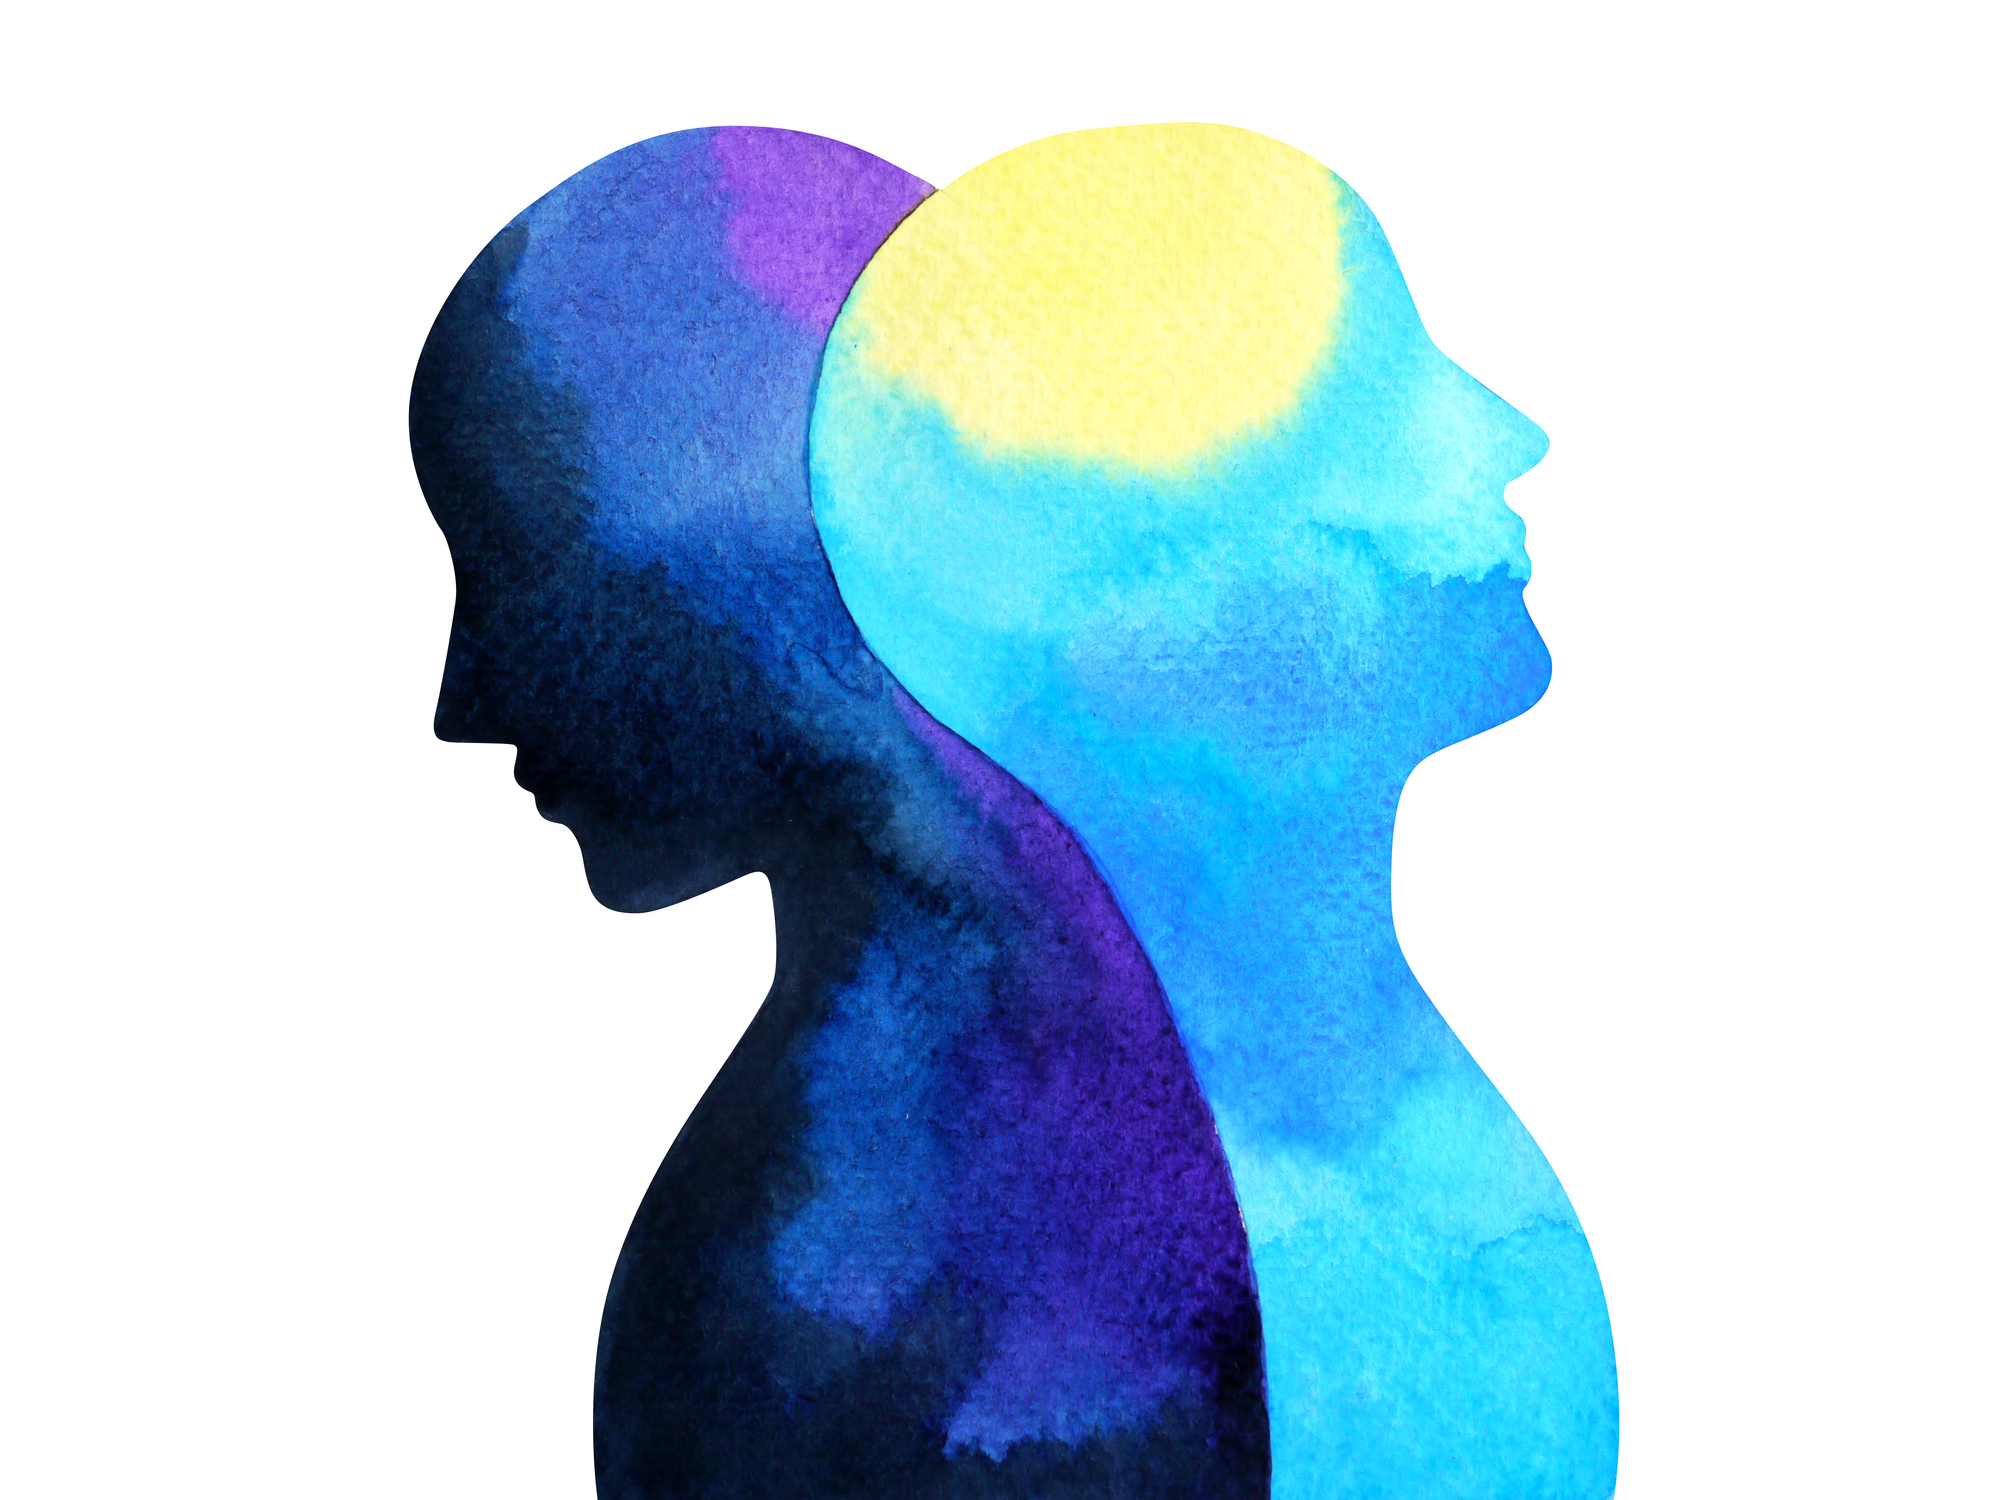 Blue, purple and yellow watercolor painting illustration showing two human figures leaning against each other back to back